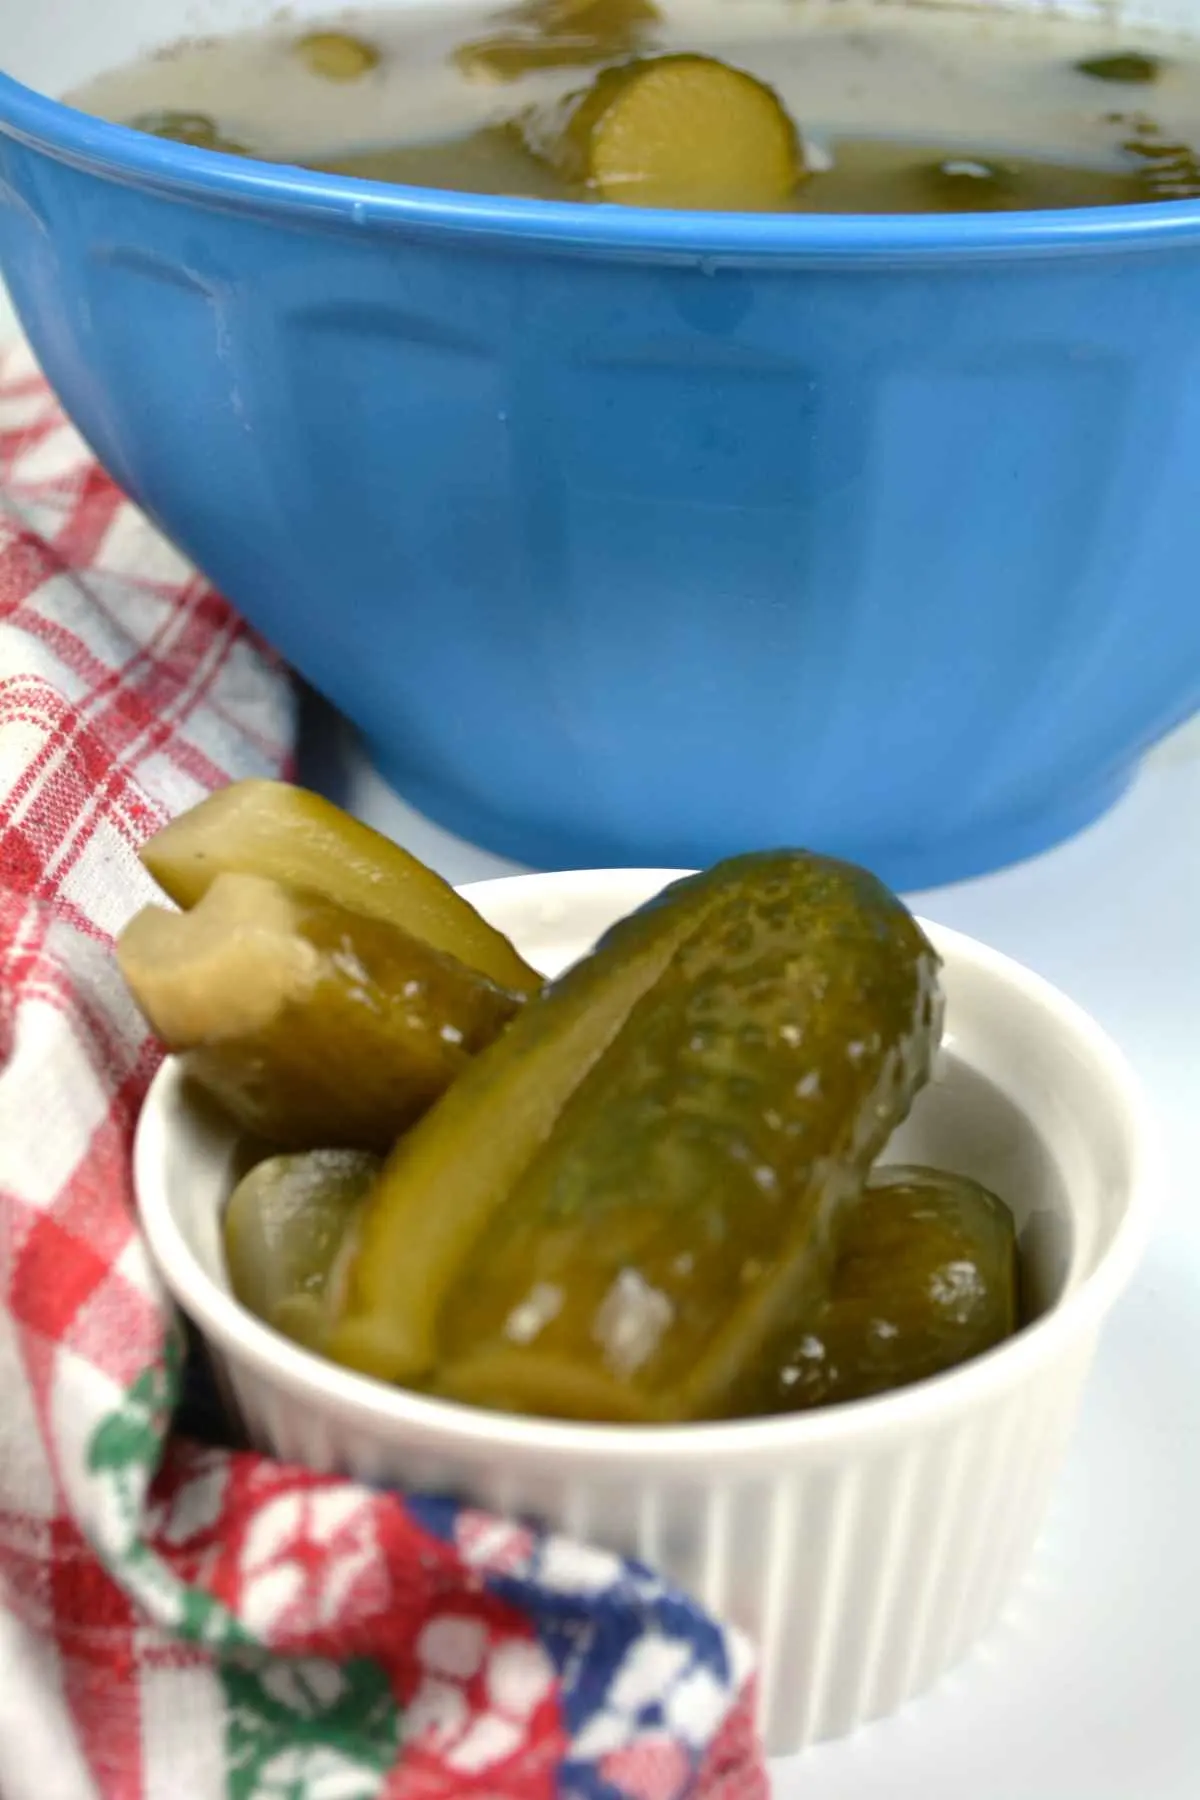 Sun Pickles Recipe-Served in the Small Bowl on the Table